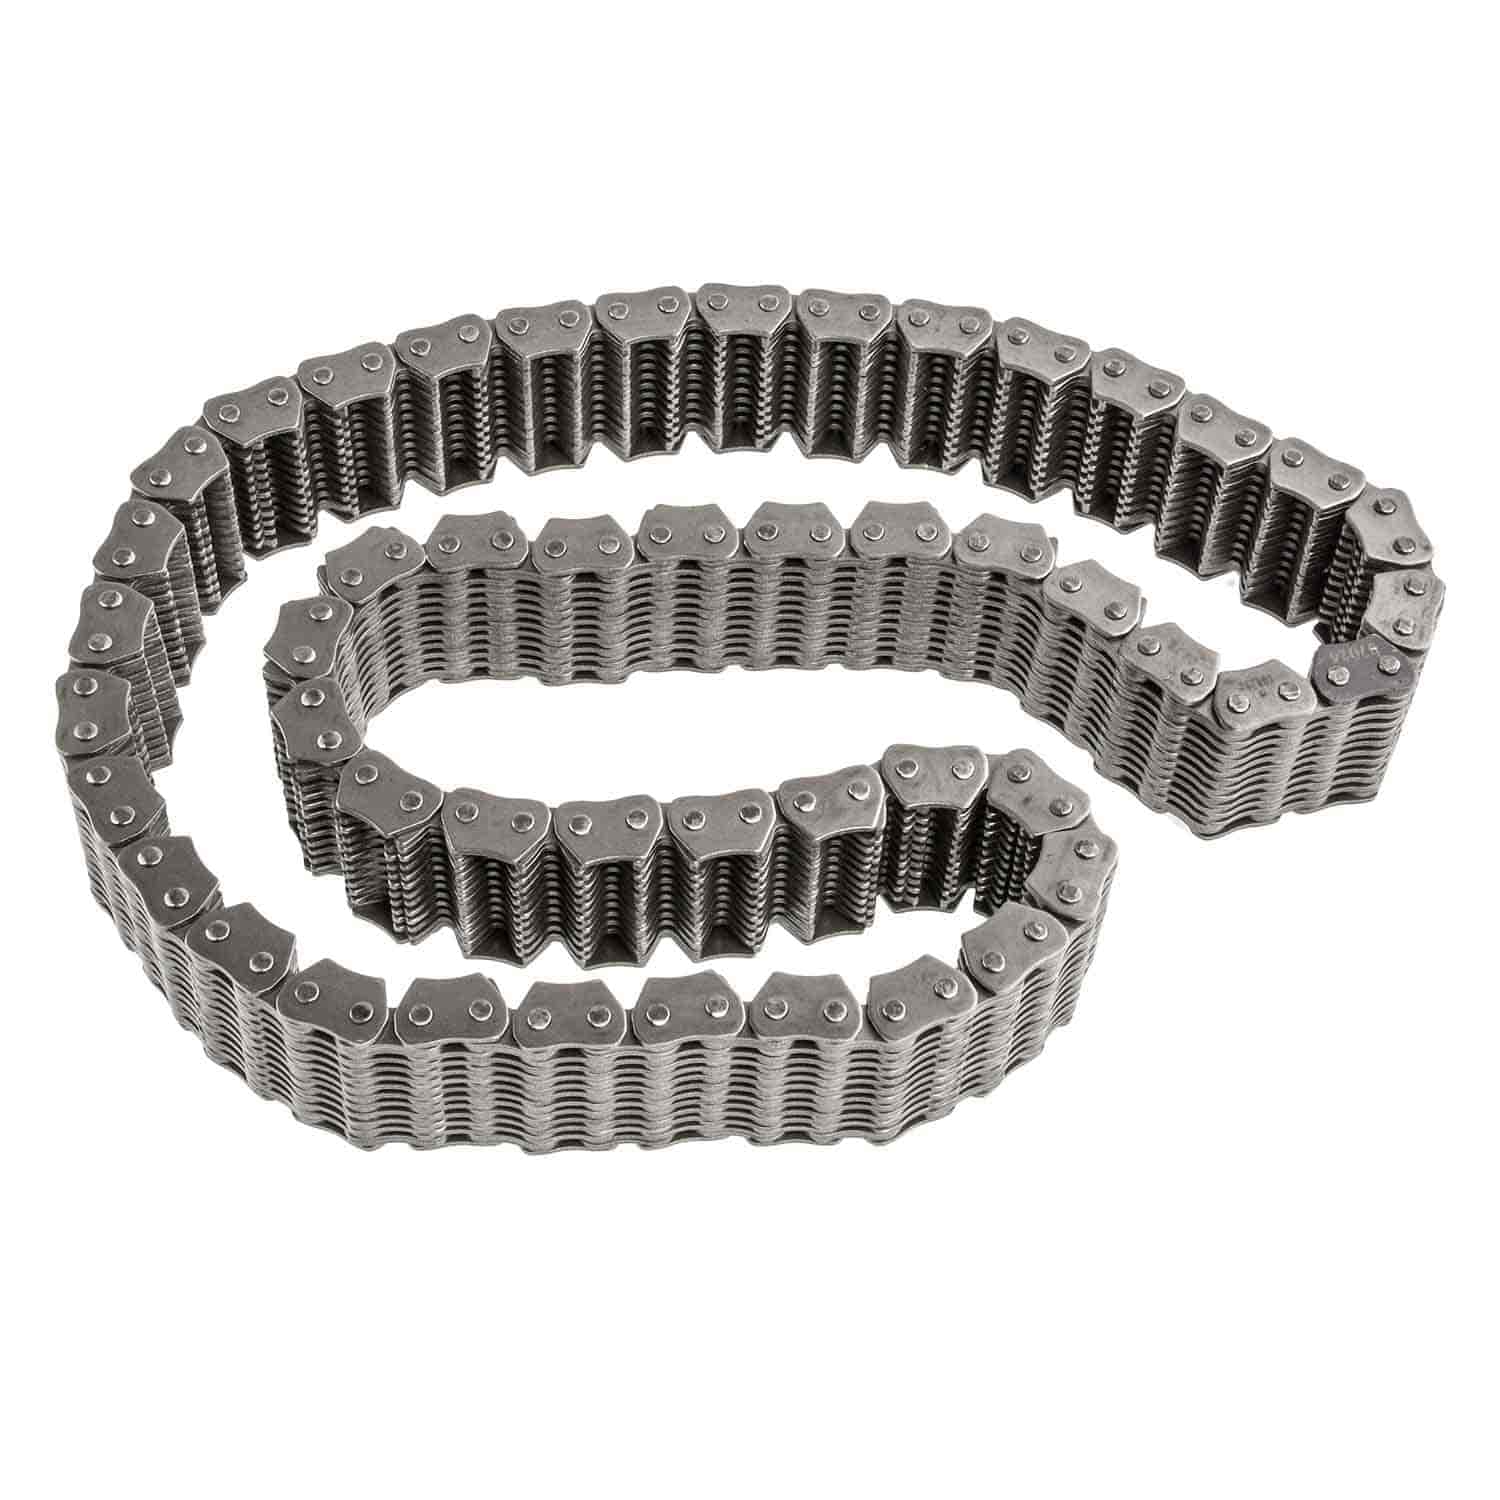 Transfer Case Drive Chain for NP 271, NP 273 Transfer Cases